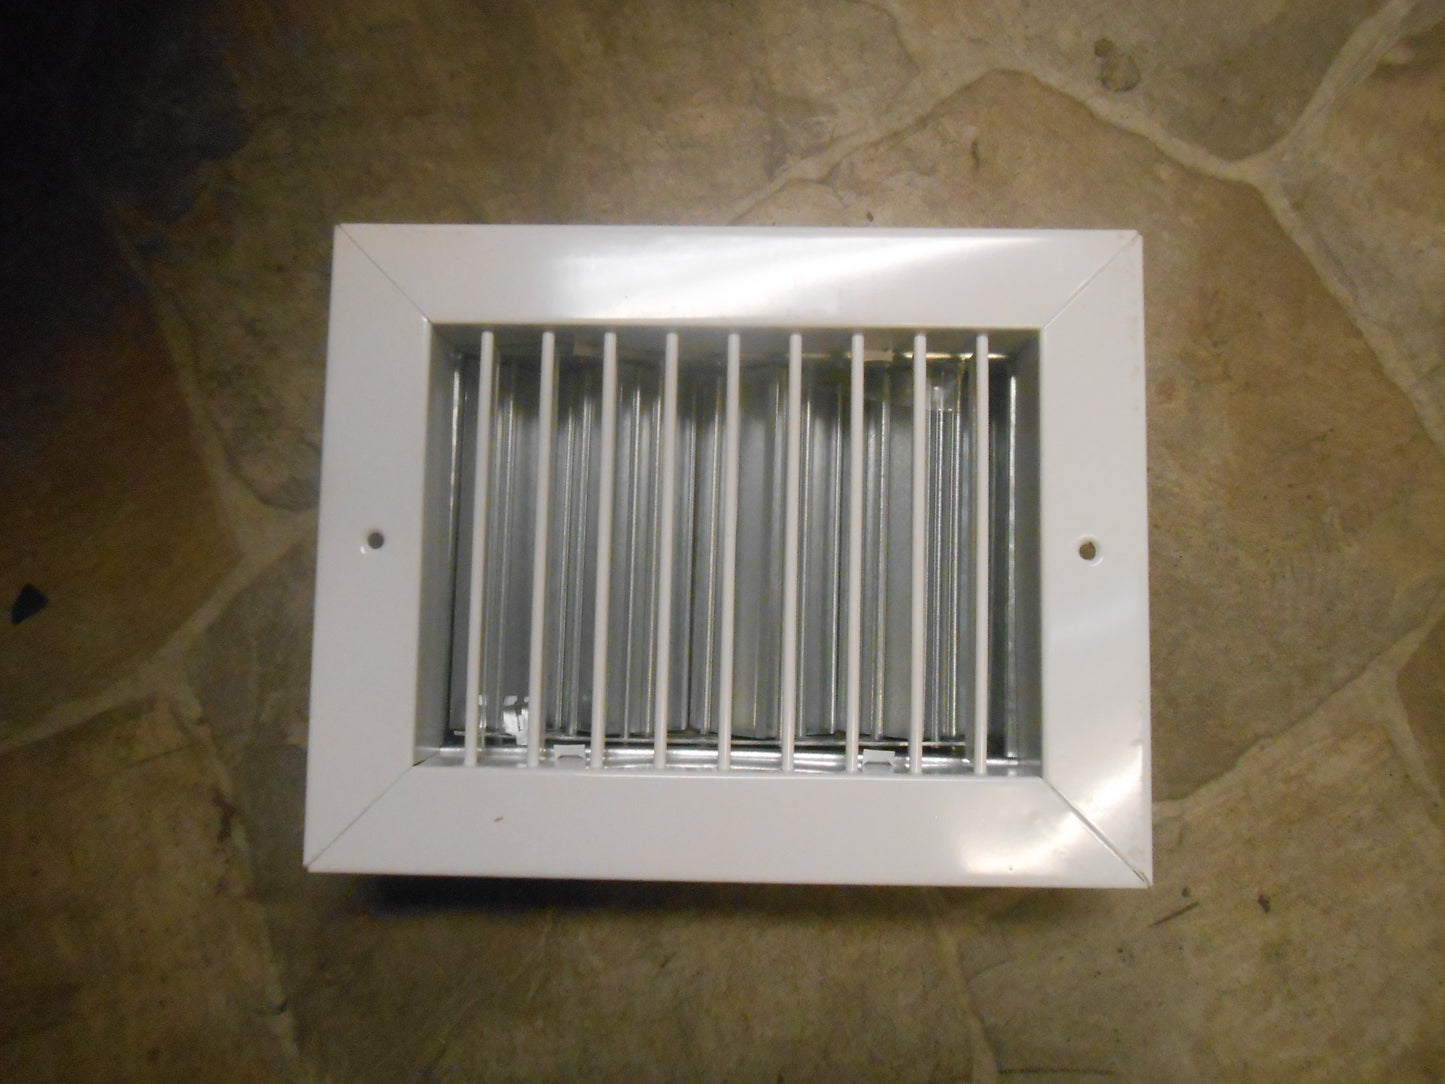 8 X 6 CEILING/WALL REGISTER WITH ADJUSTABLE LOUVERS